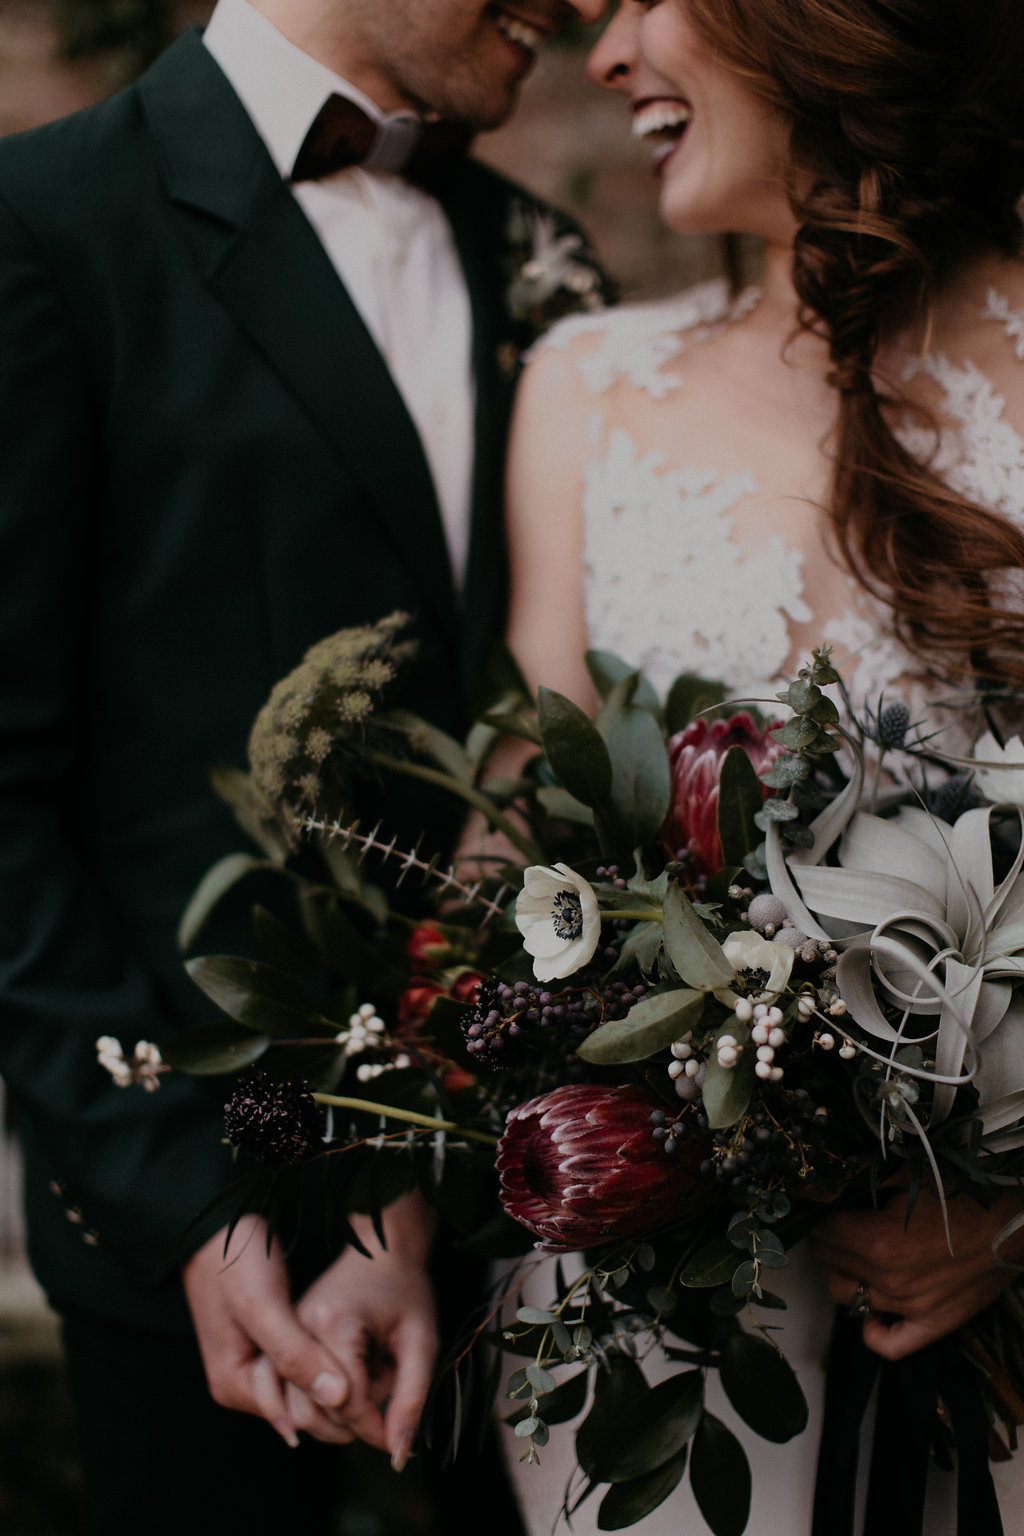 Wintry Bridal Bouquet with air plants, peonies, berries, eucalyptus, and loose, untamed greenery // Nashville Florist